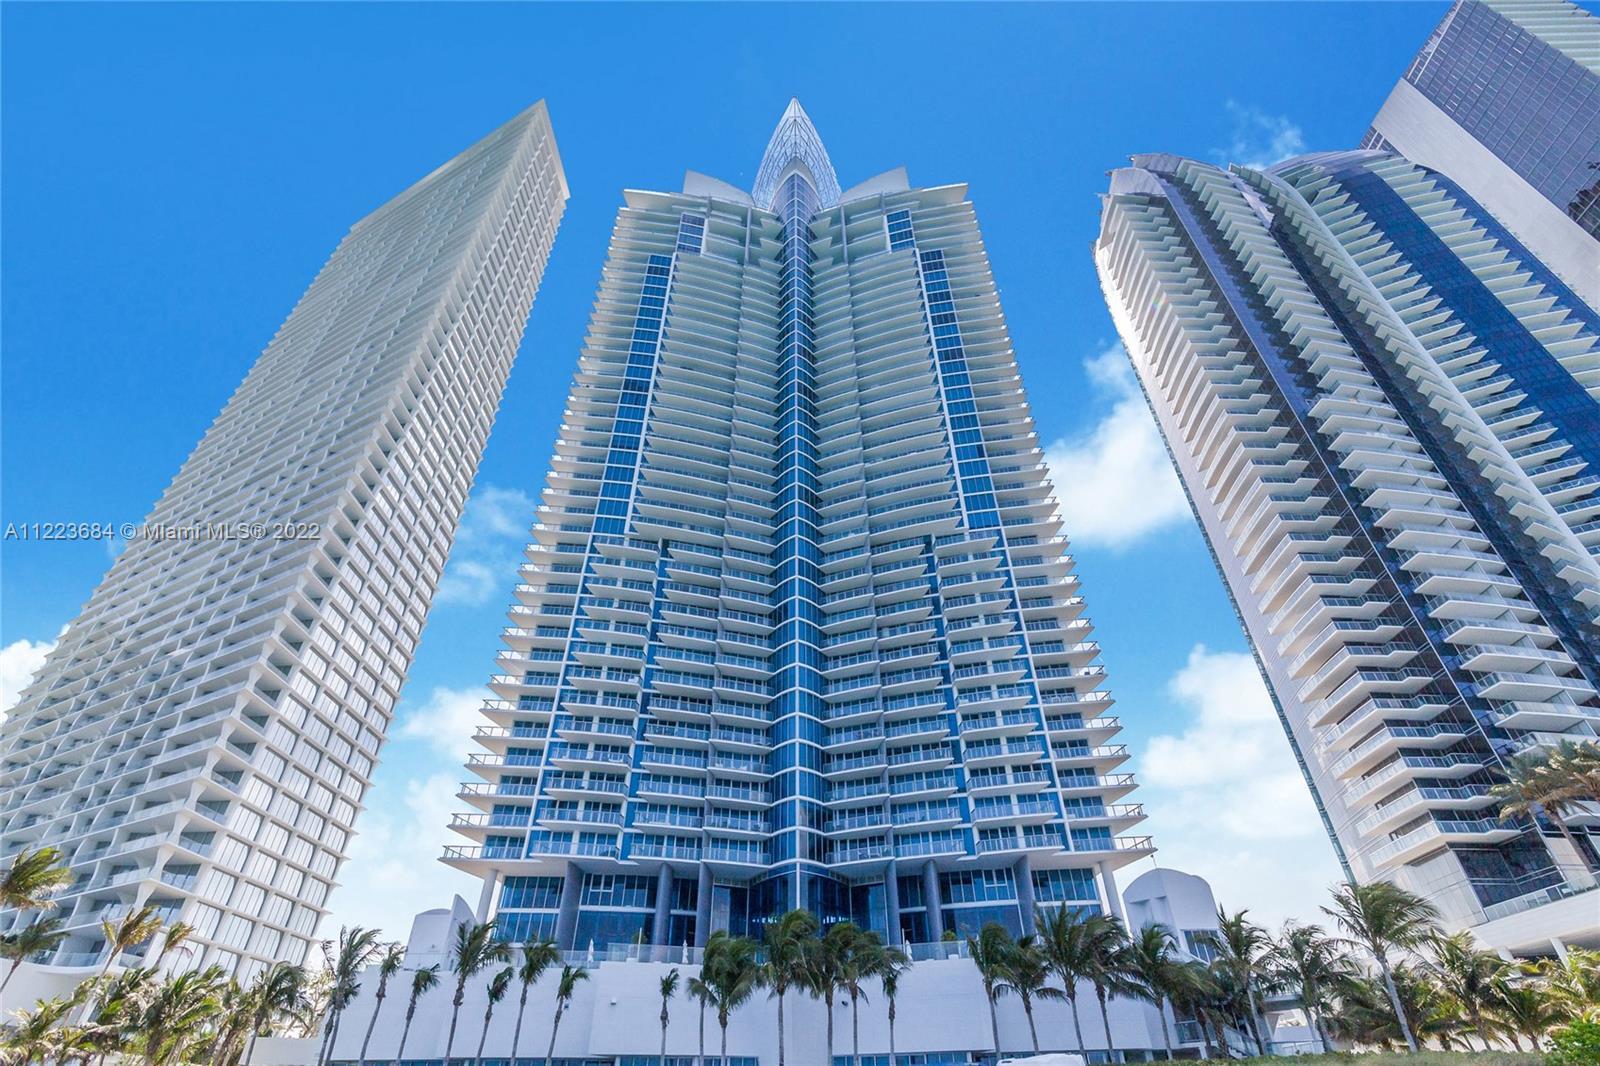 Spectacular 1 Bed + Den + 2 Baths residence with direct ocean view in the desirable Sunny Isles Beac